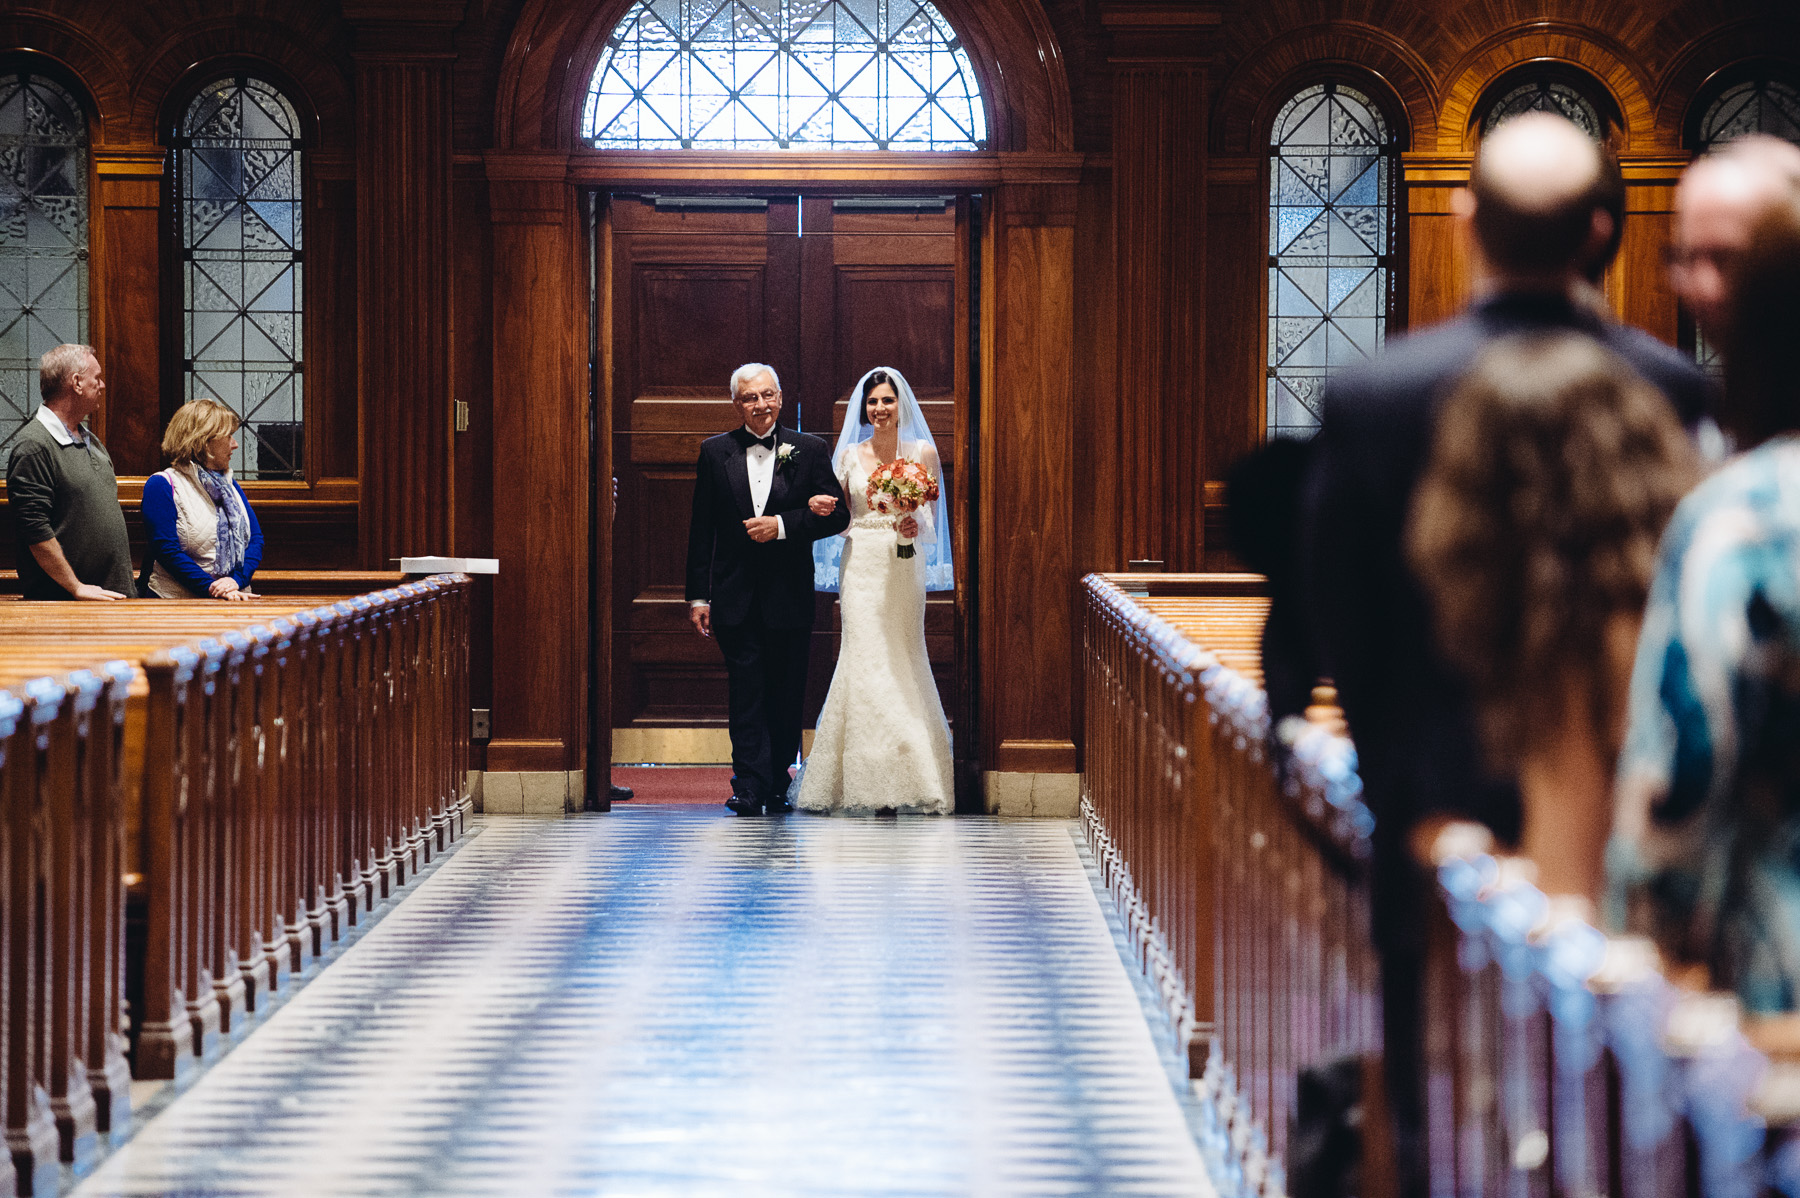 Father walks daughter down the aisle at the Basilica